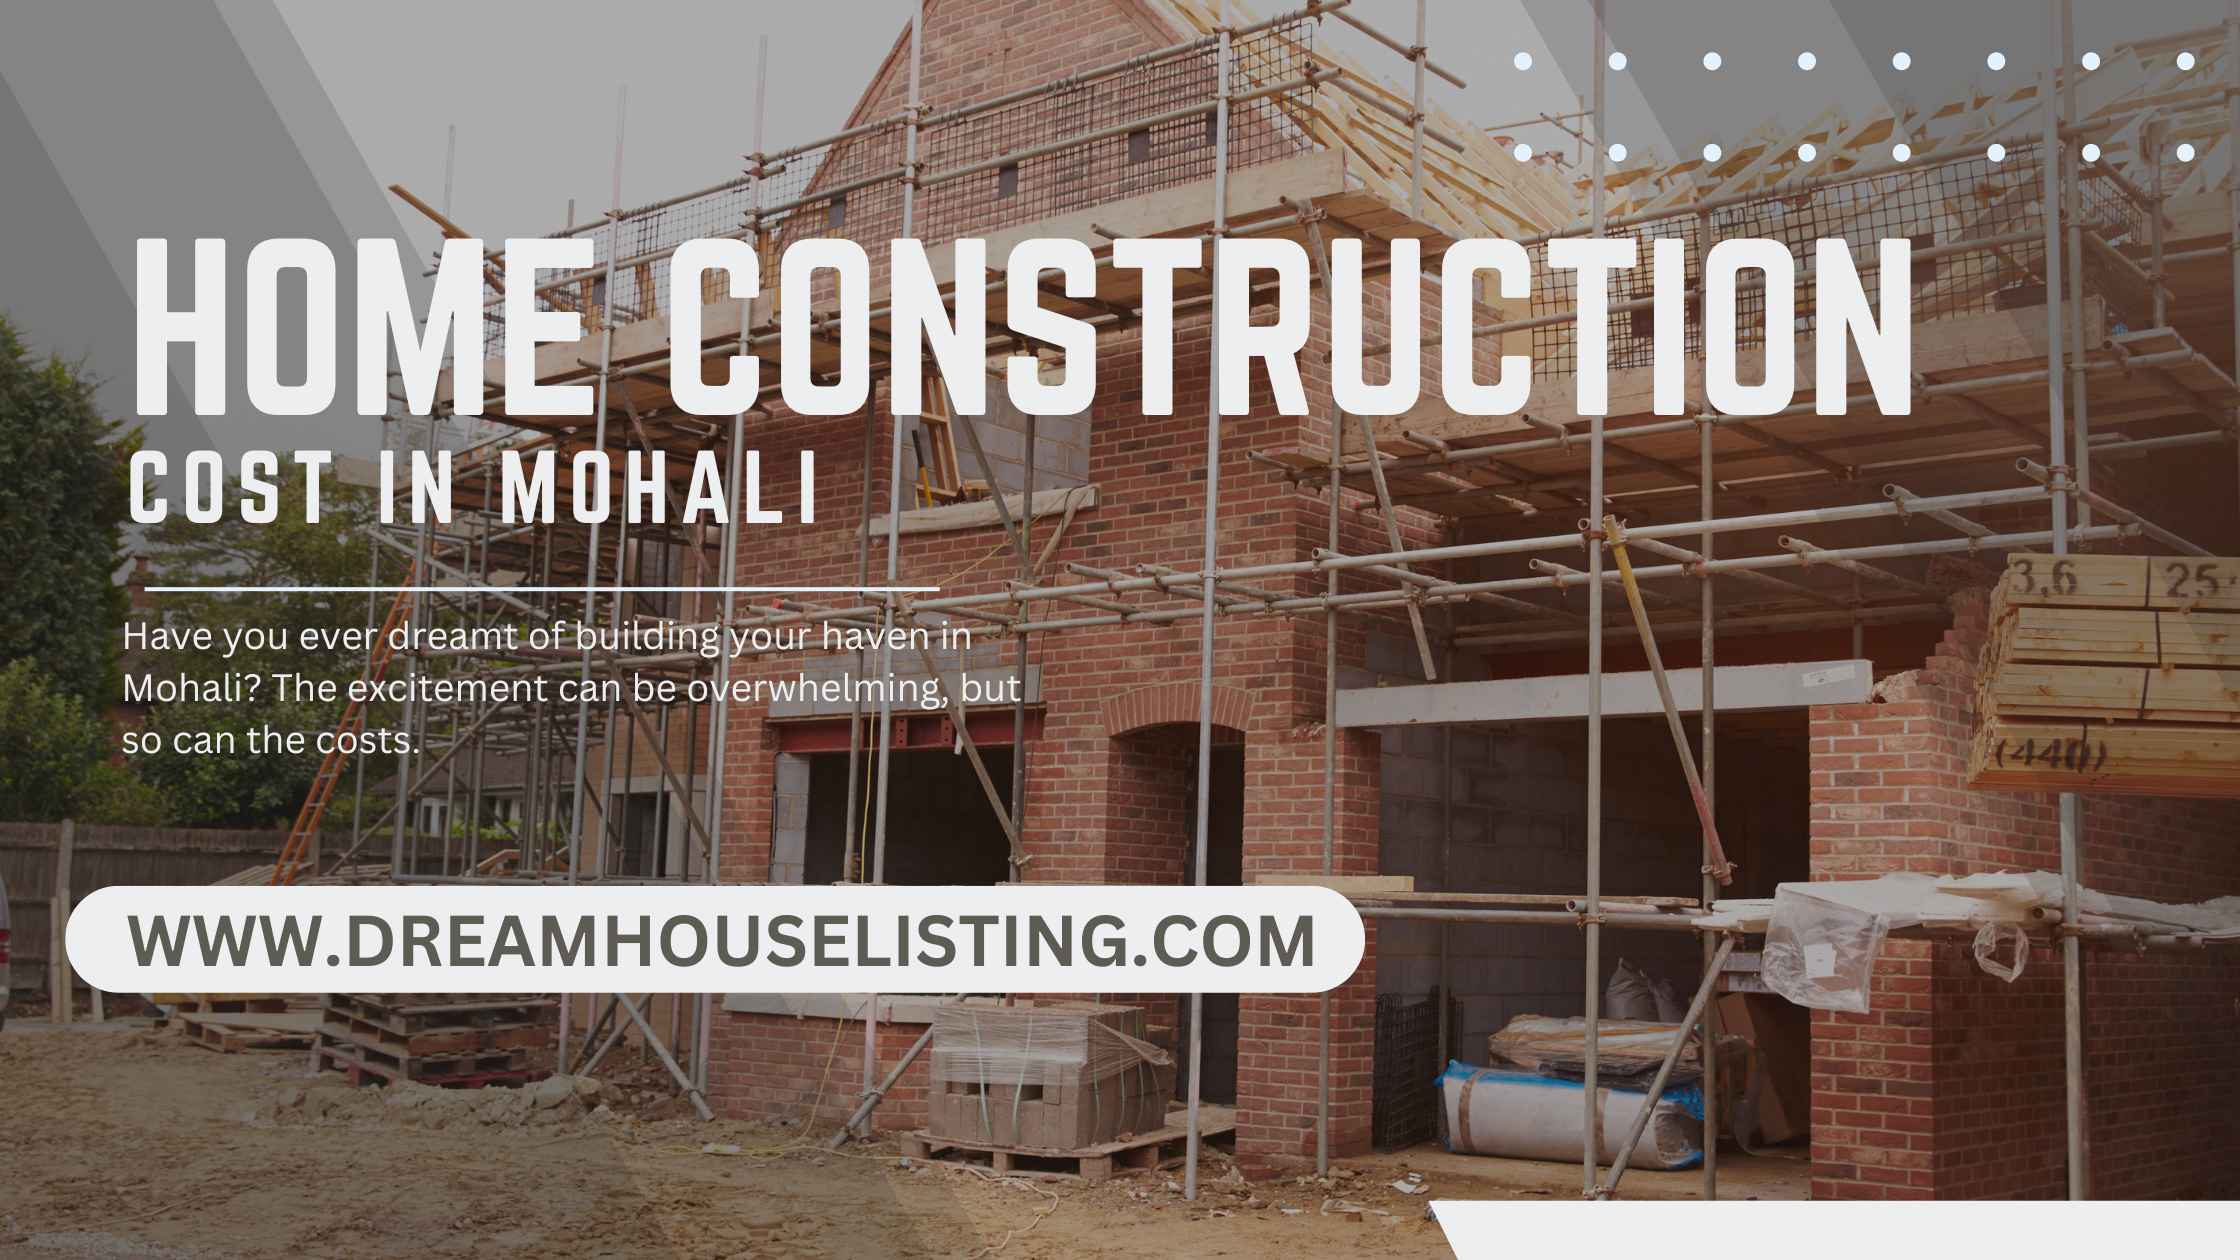 Home Construction cost in Mohali